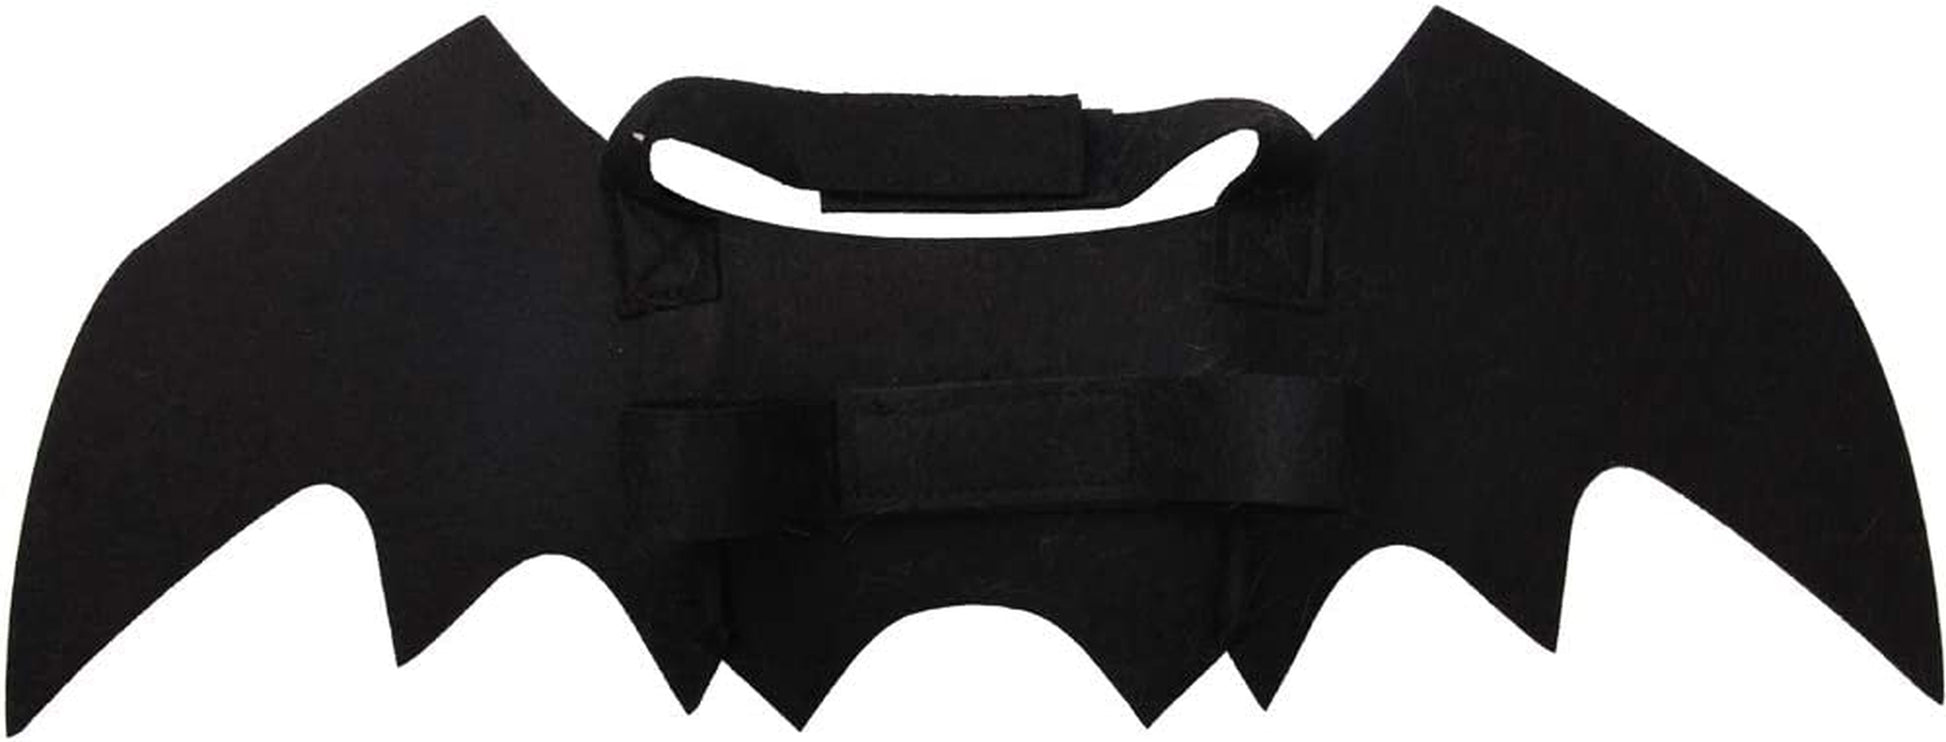 Halloween Cat Bat Wings - Pet Costume with Collar, Leads, and Cosplay Accessories for Cute Dress-Up